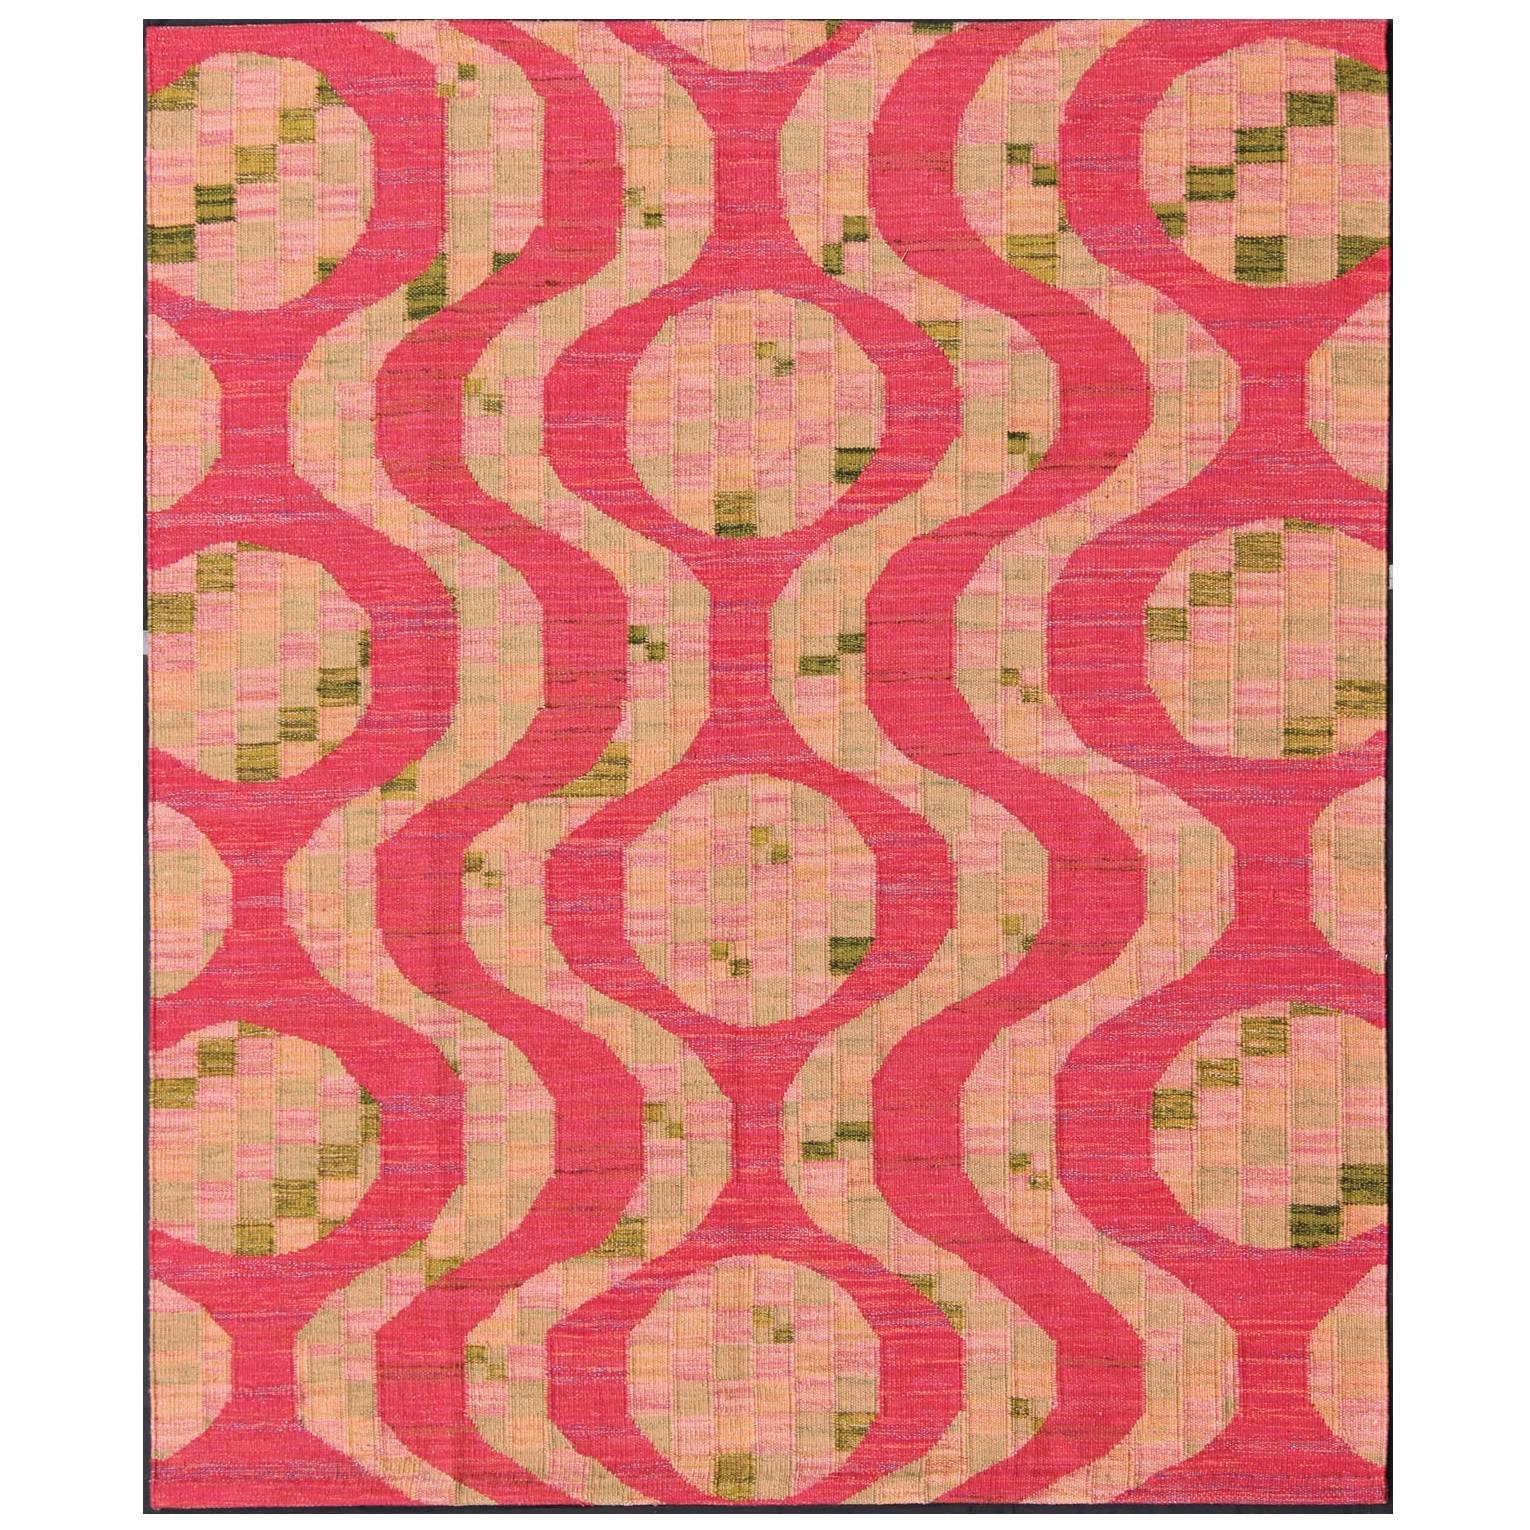 Scandinavian Design Flat-Weave Rug in Red, Salmon, Pink and Green 